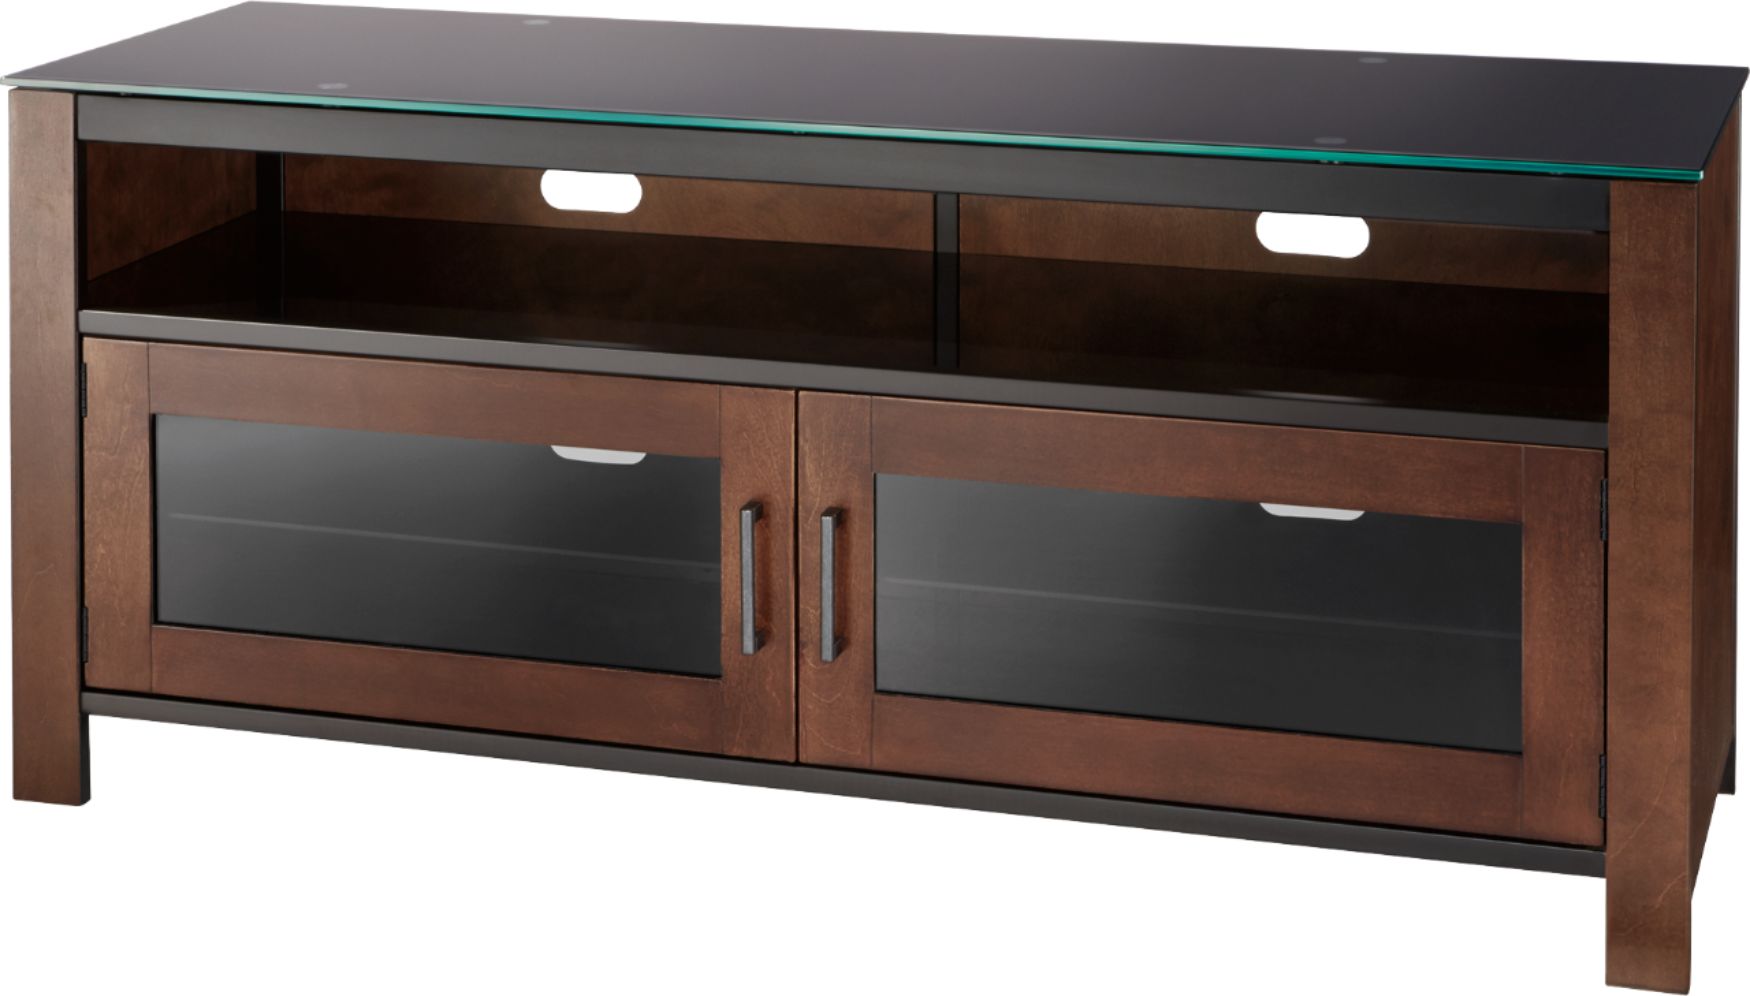 Insignia™ - TV Stand for Most Flat-Panel TVs Up to 60" - Mocha